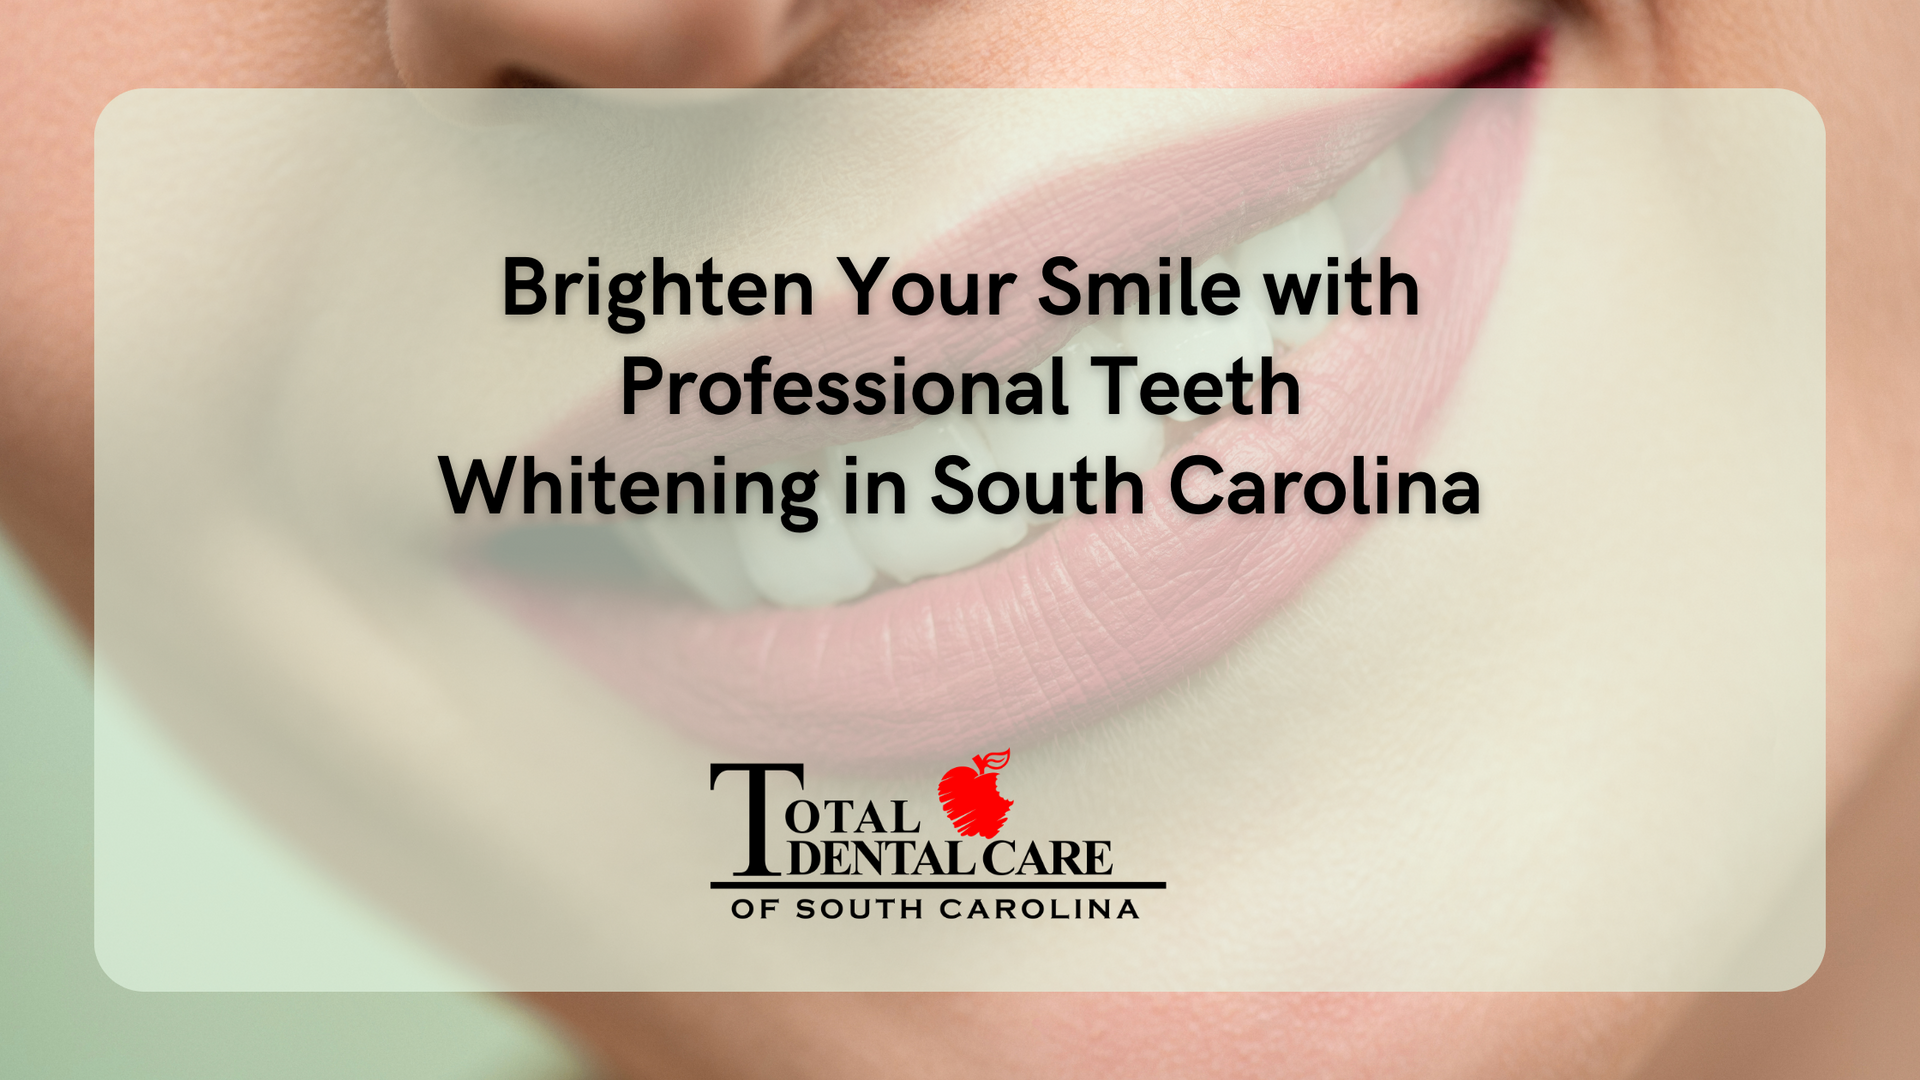 a poster for total dental care of south carolina